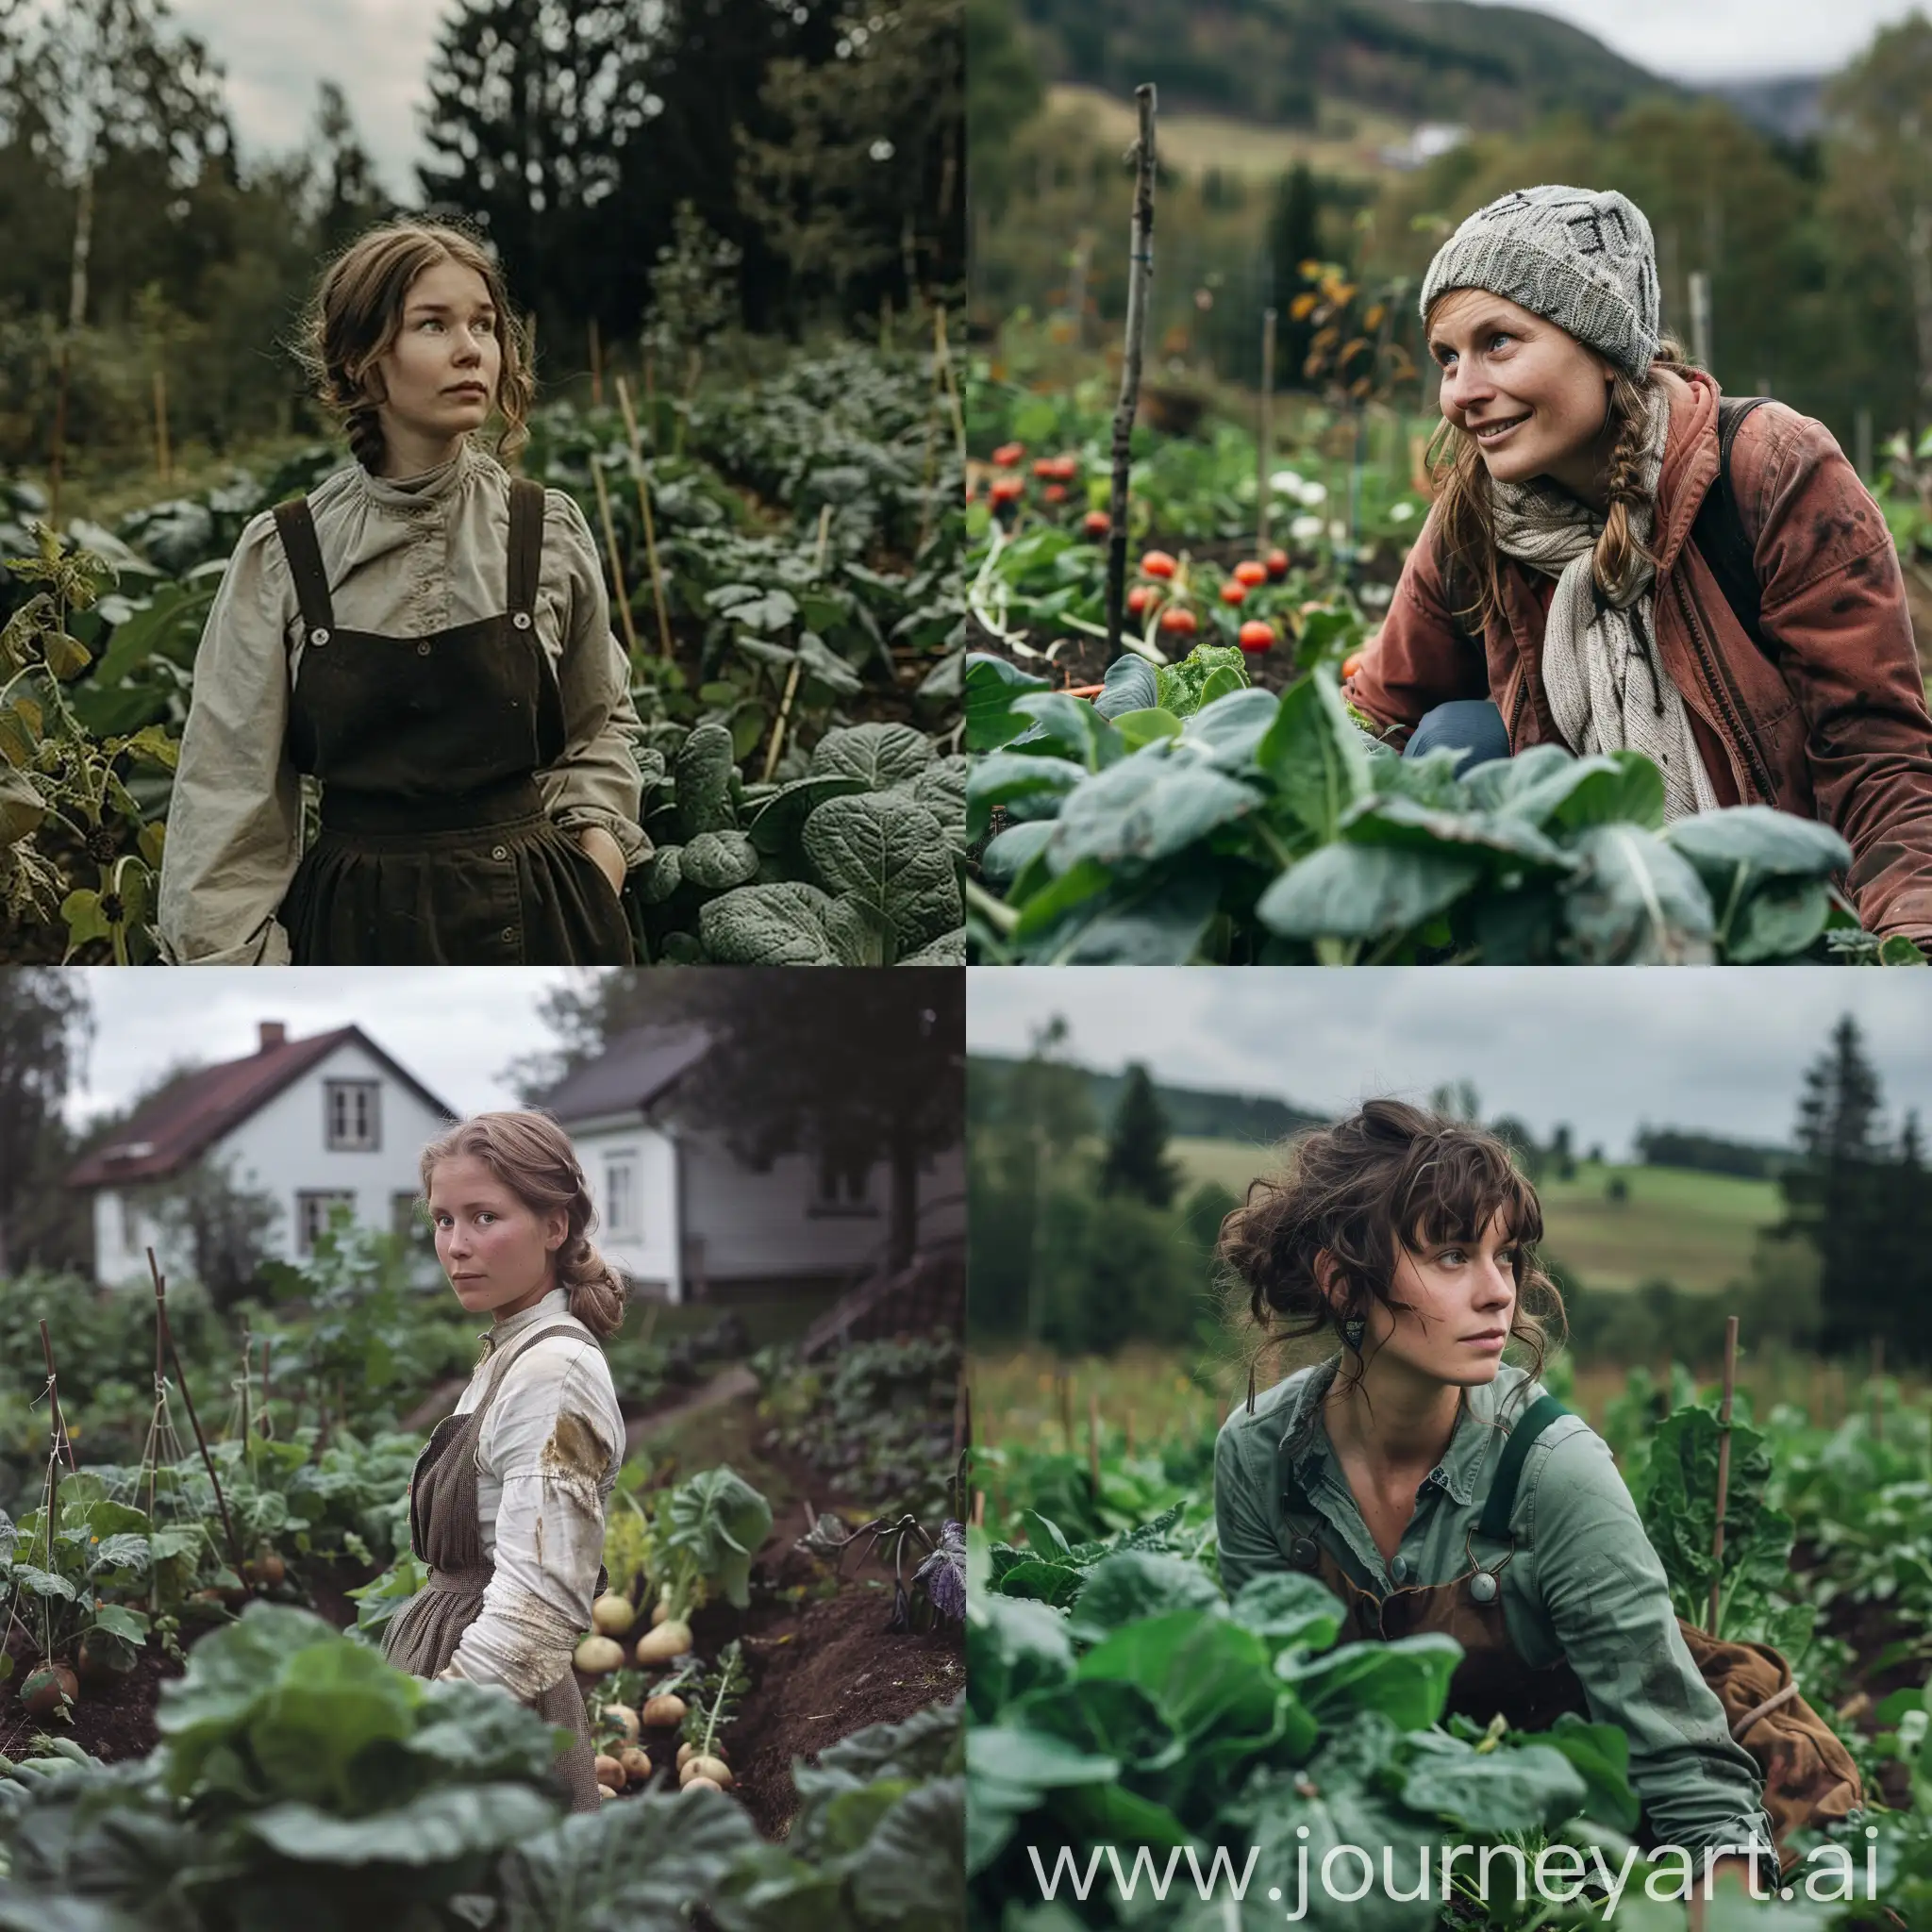 a woman in a vegetable patch, in the style of norwegian nature, youthful energy